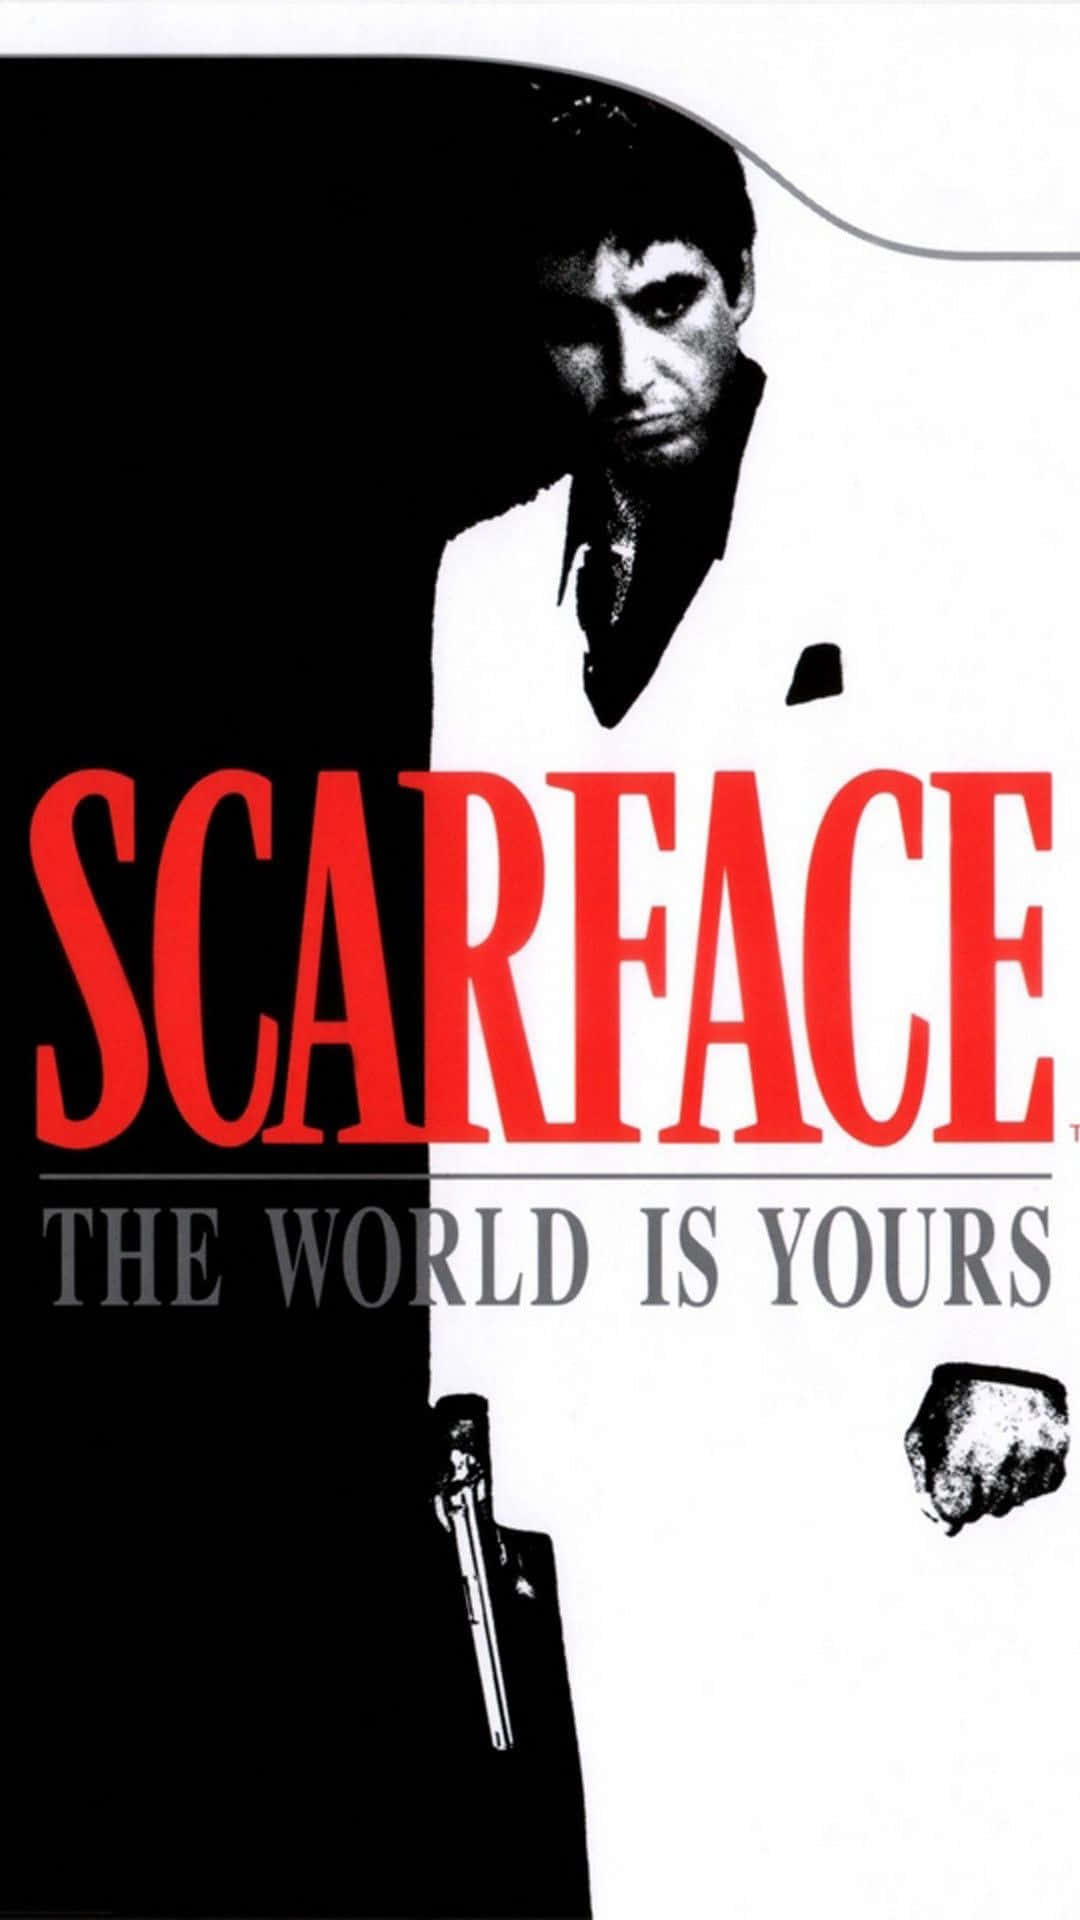 ScarfaceiPhone3WallpapersParallax  Scarface poster Scarface movie  Scarface